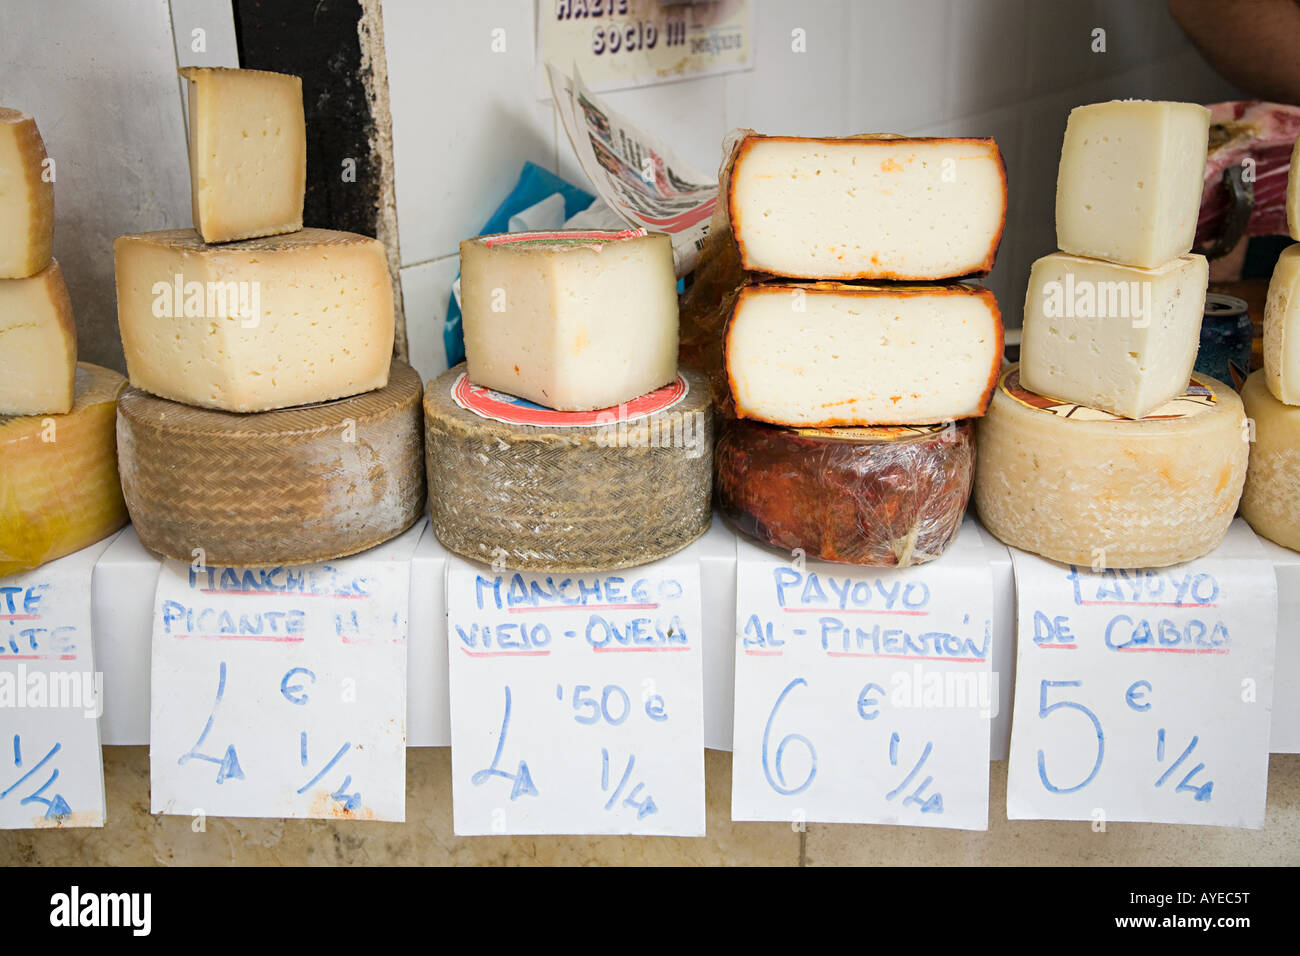 Cheese on a market stall Stock Photo